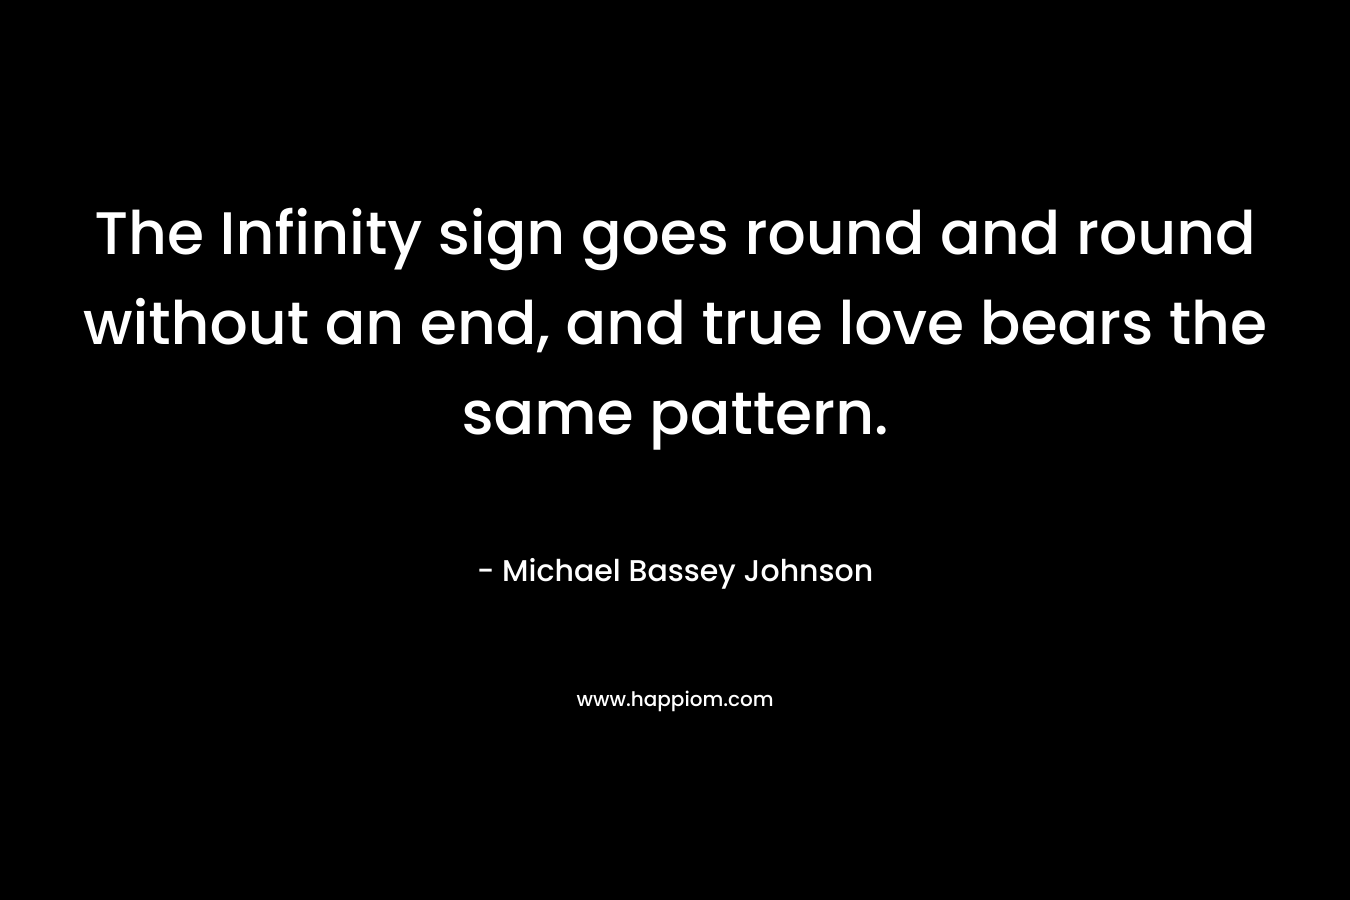 The Infinity sign goes round and round without an end, and true love bears the same pattern. – Michael Bassey Johnson